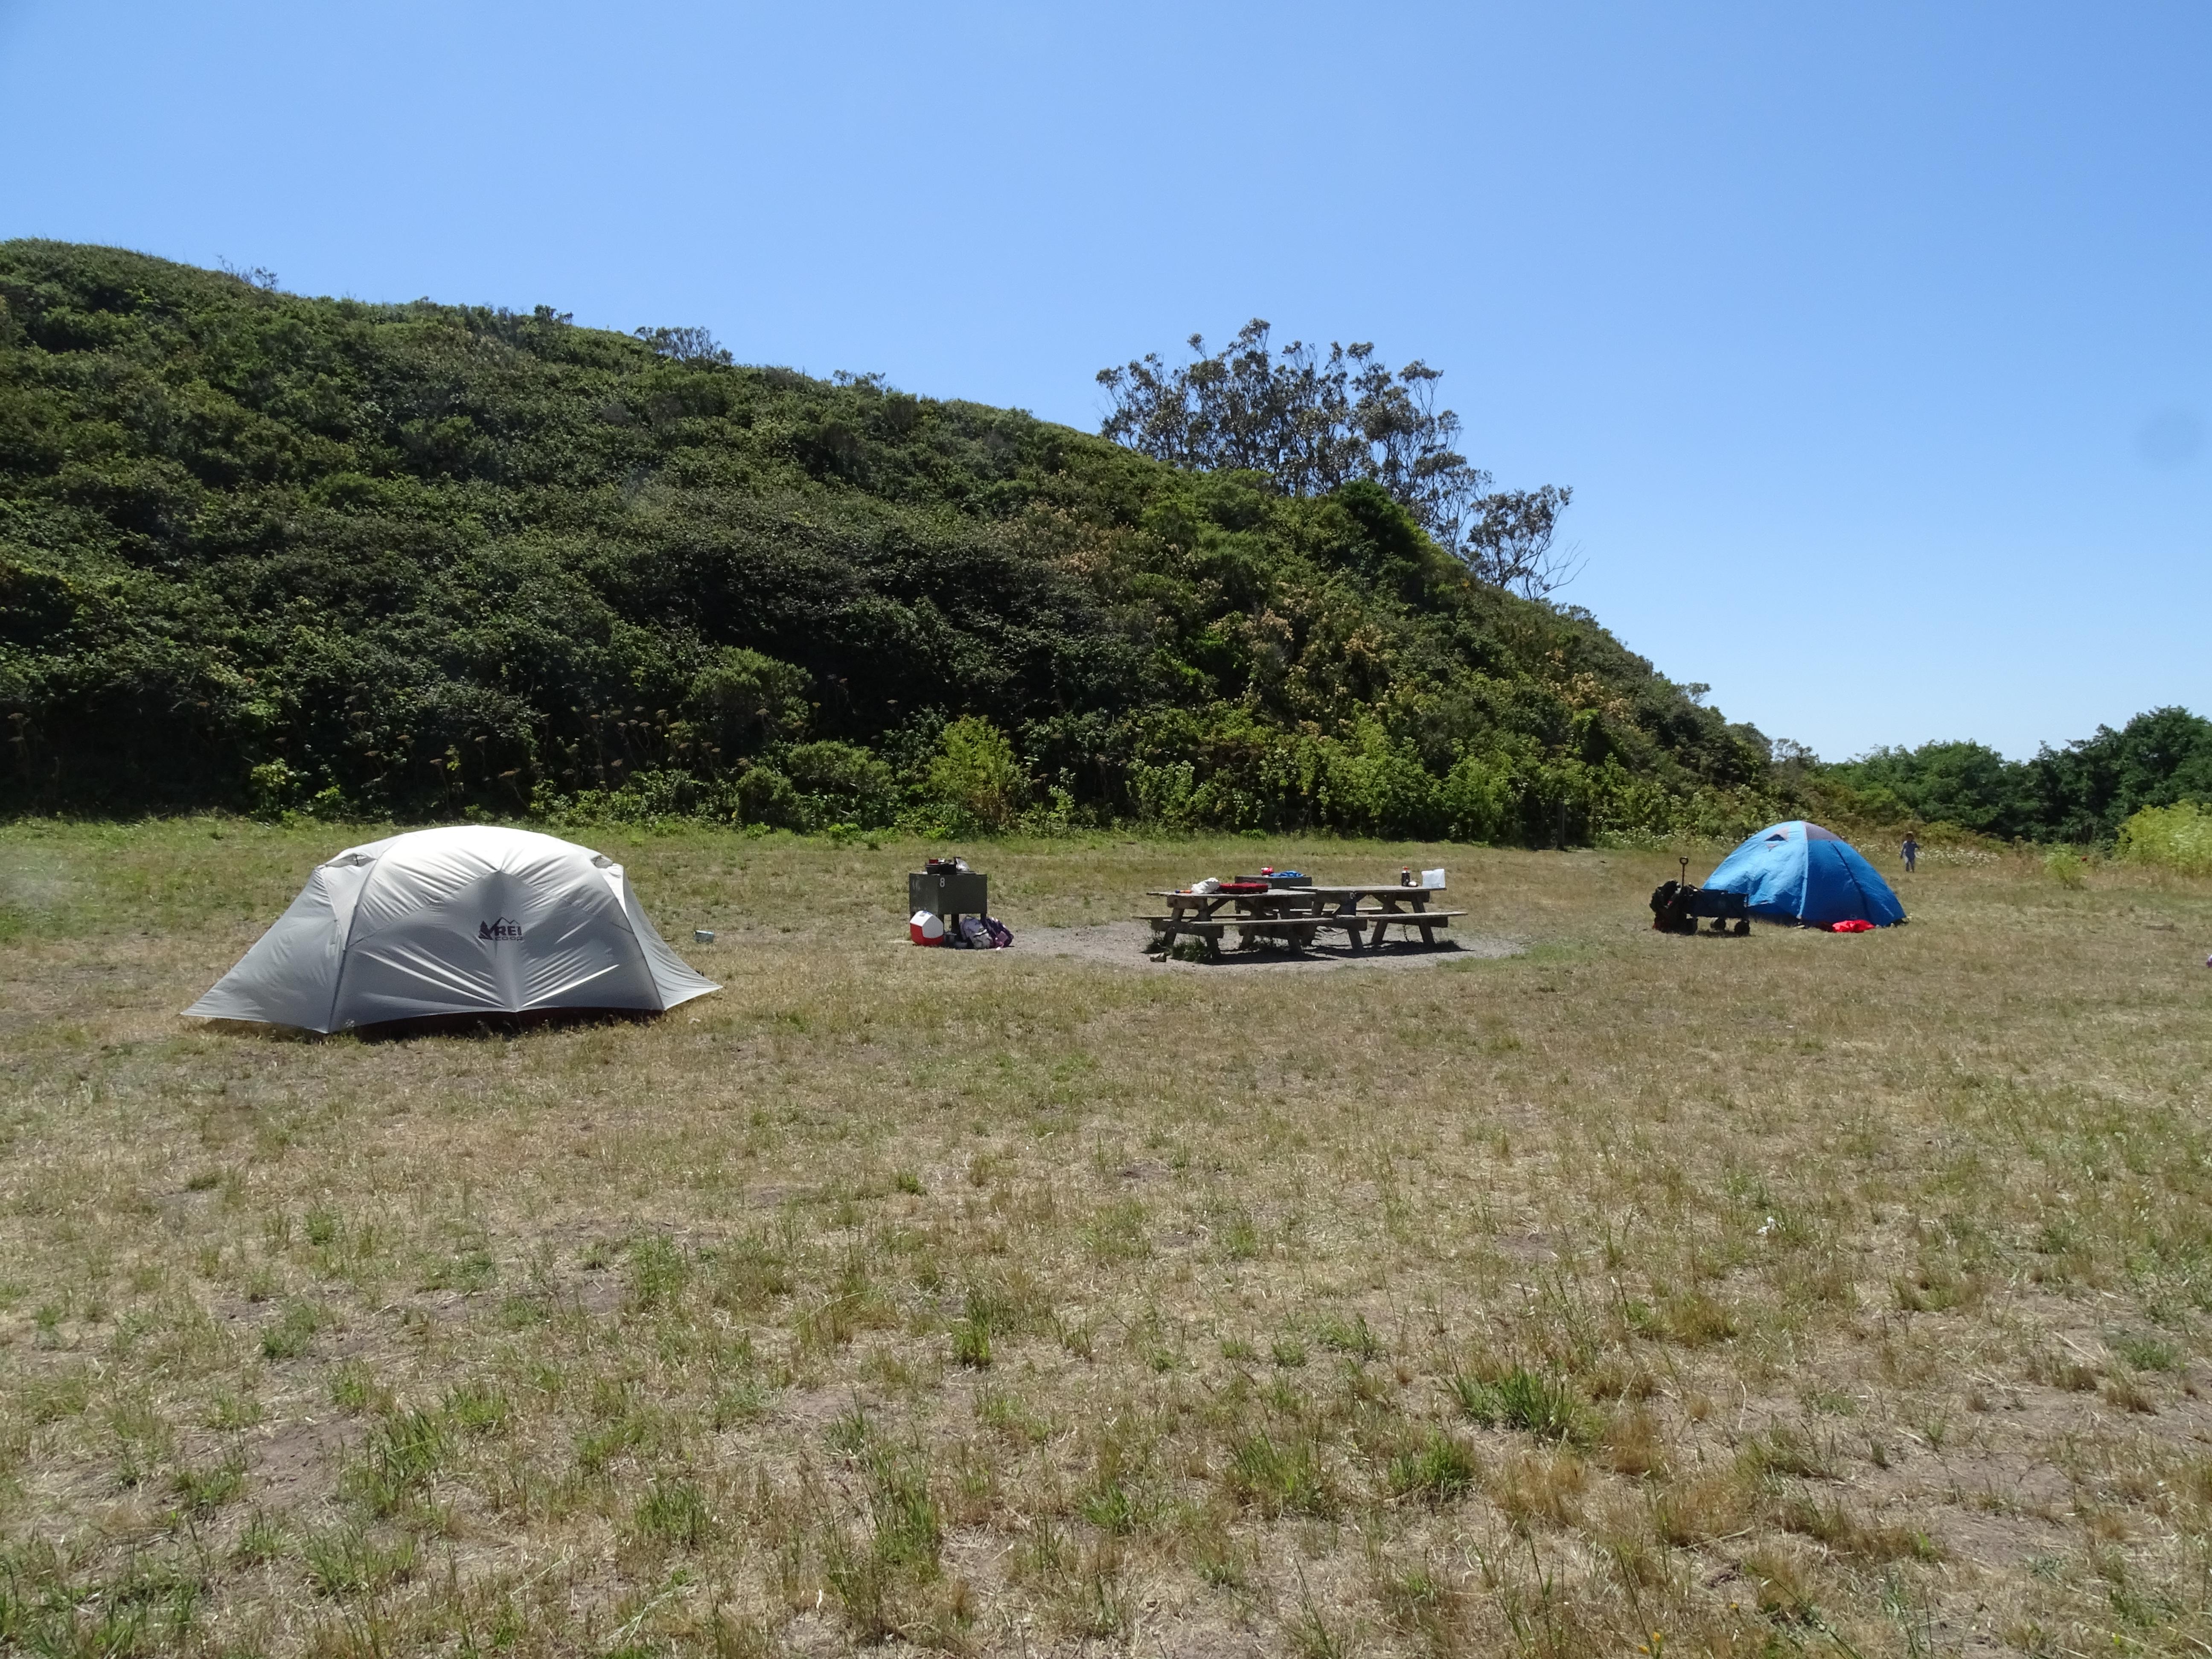 A campsite containing two small tents, two picnic tables, and two food storage lockers.